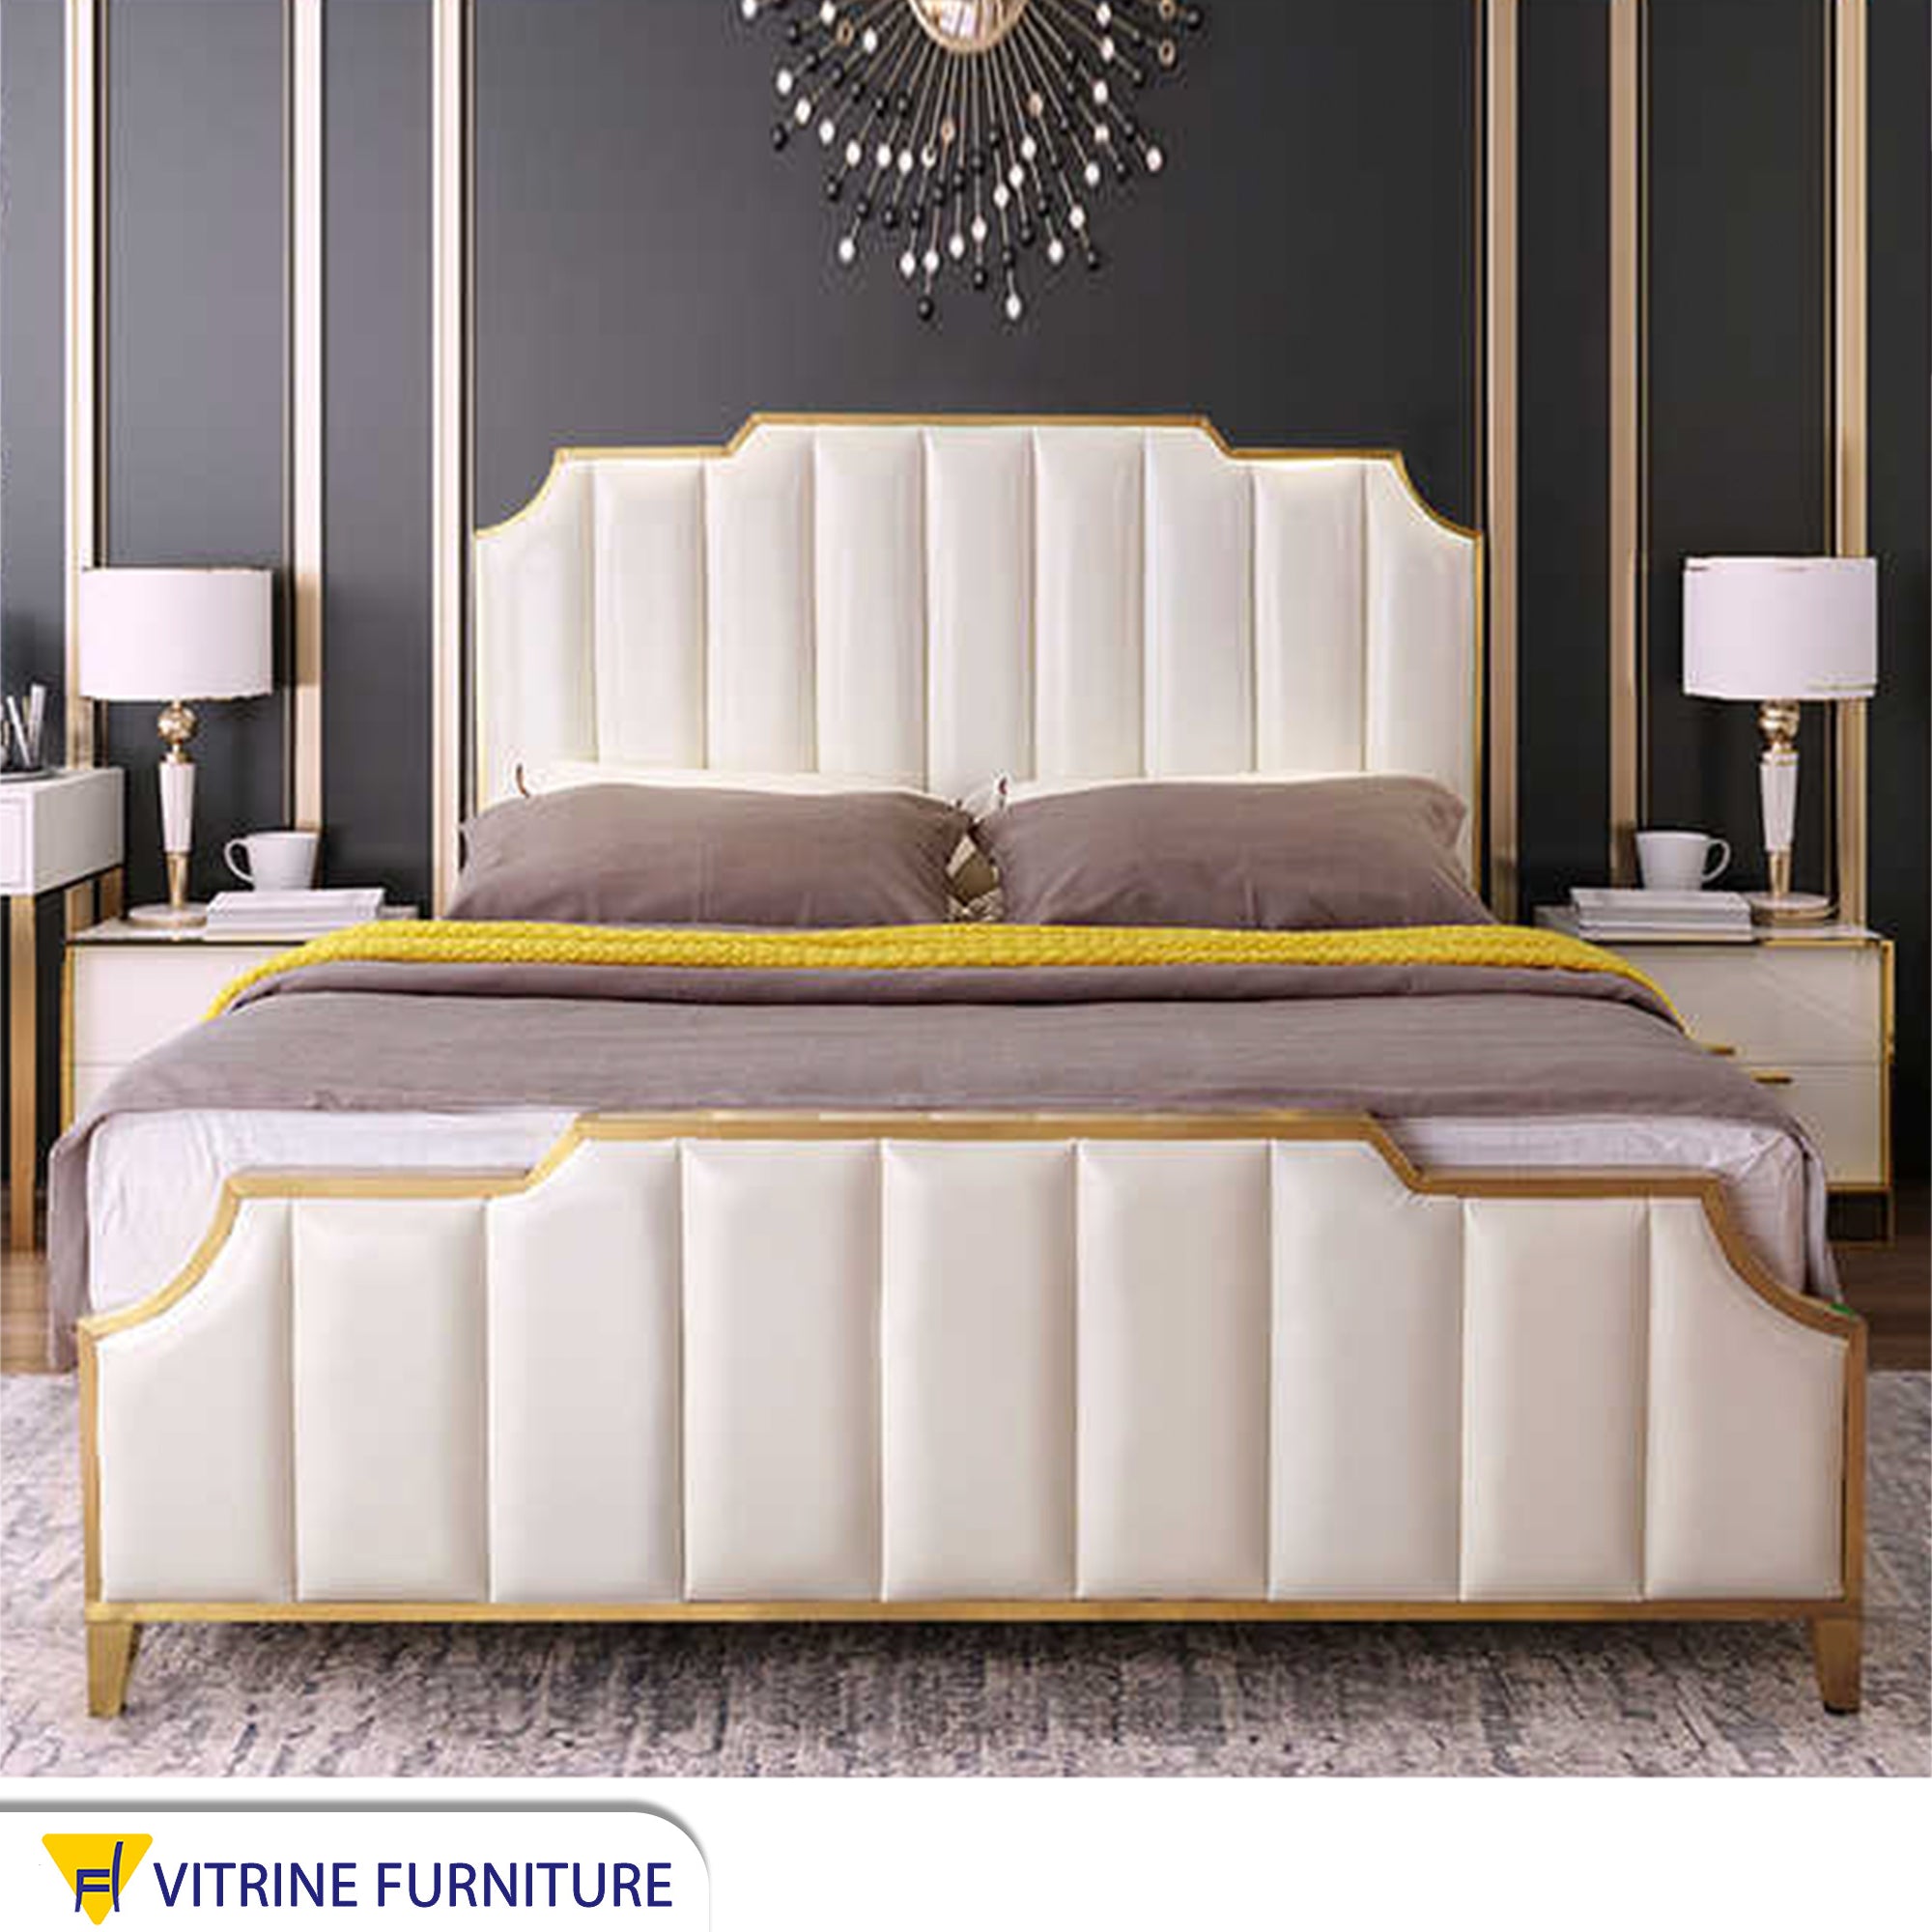 Pearly white bed with split lengthwise upholstery